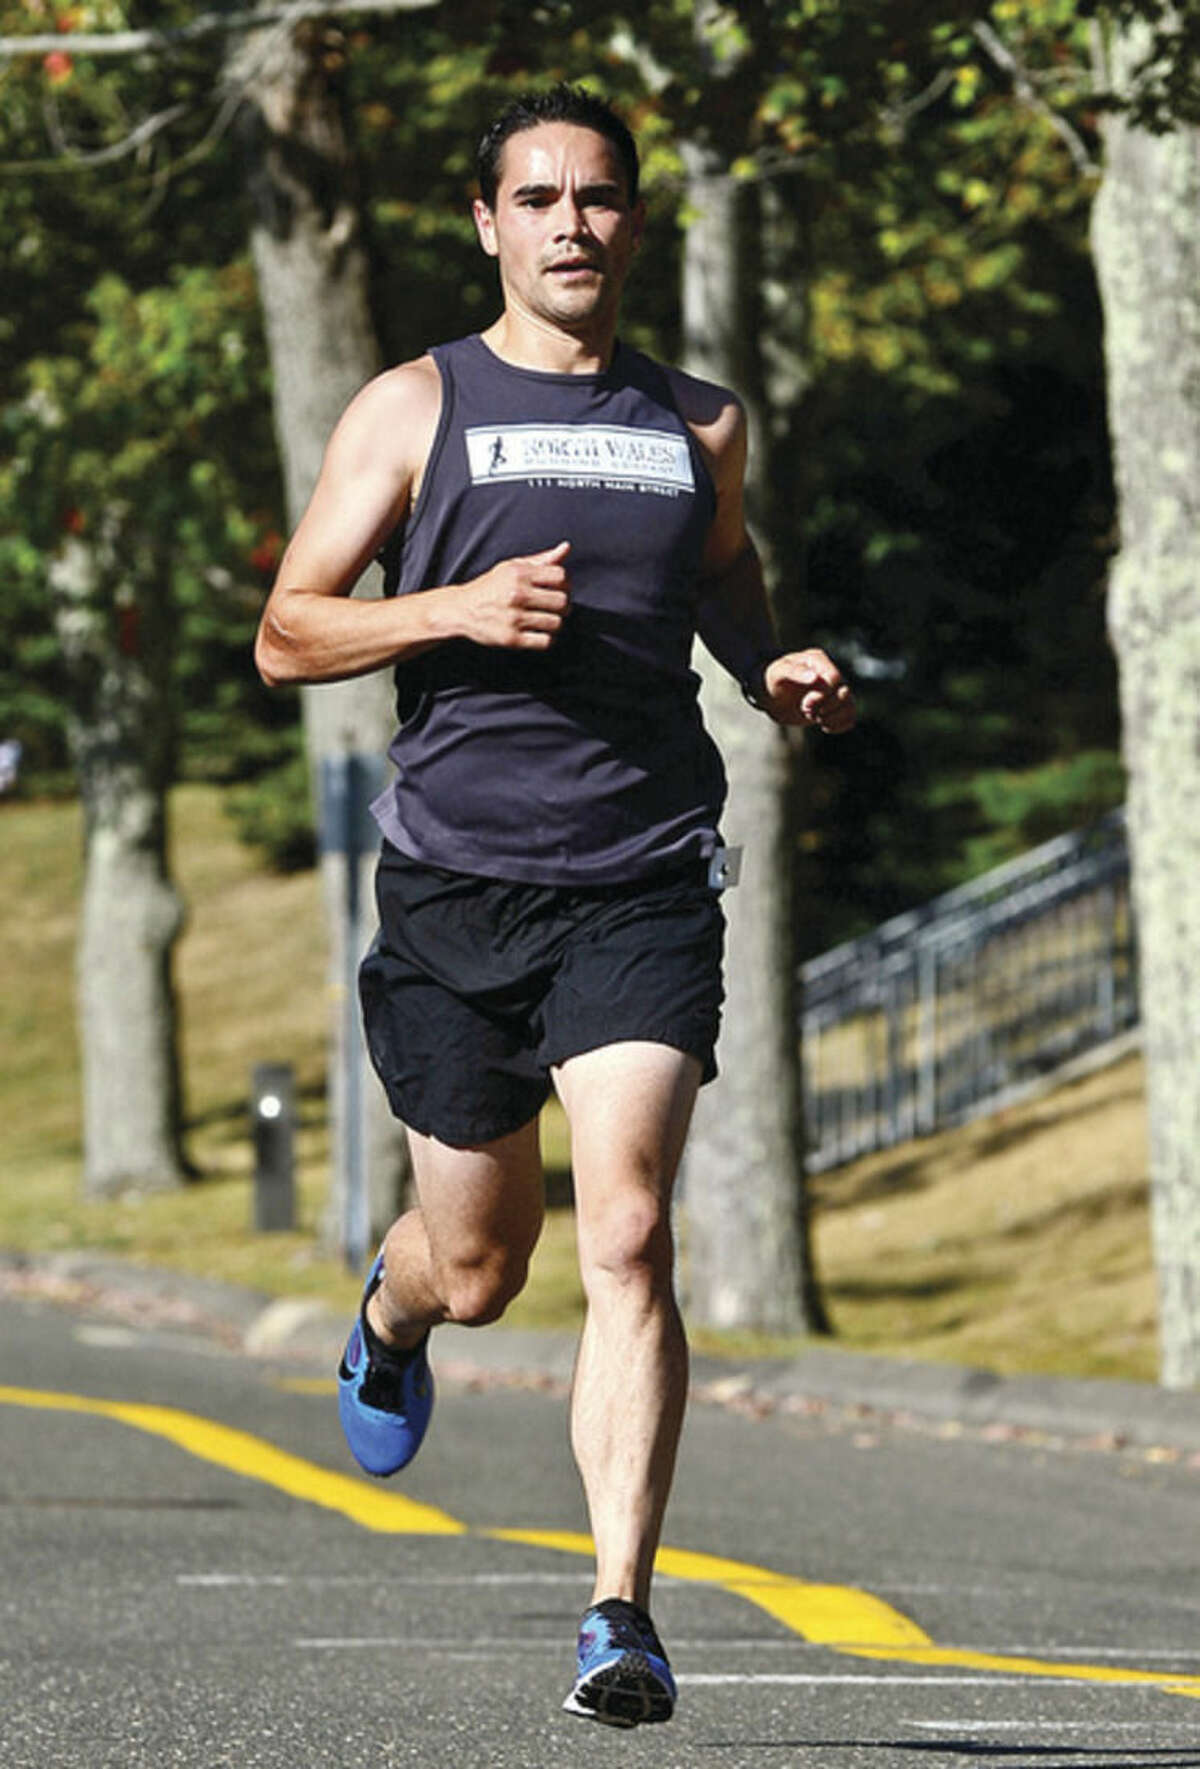 Hour photo/Erik Trautmann Ridgefield's James Osborn finishes first during the Westport Road Runners Summer Series 10-mile race on Saturday at Staples High School.